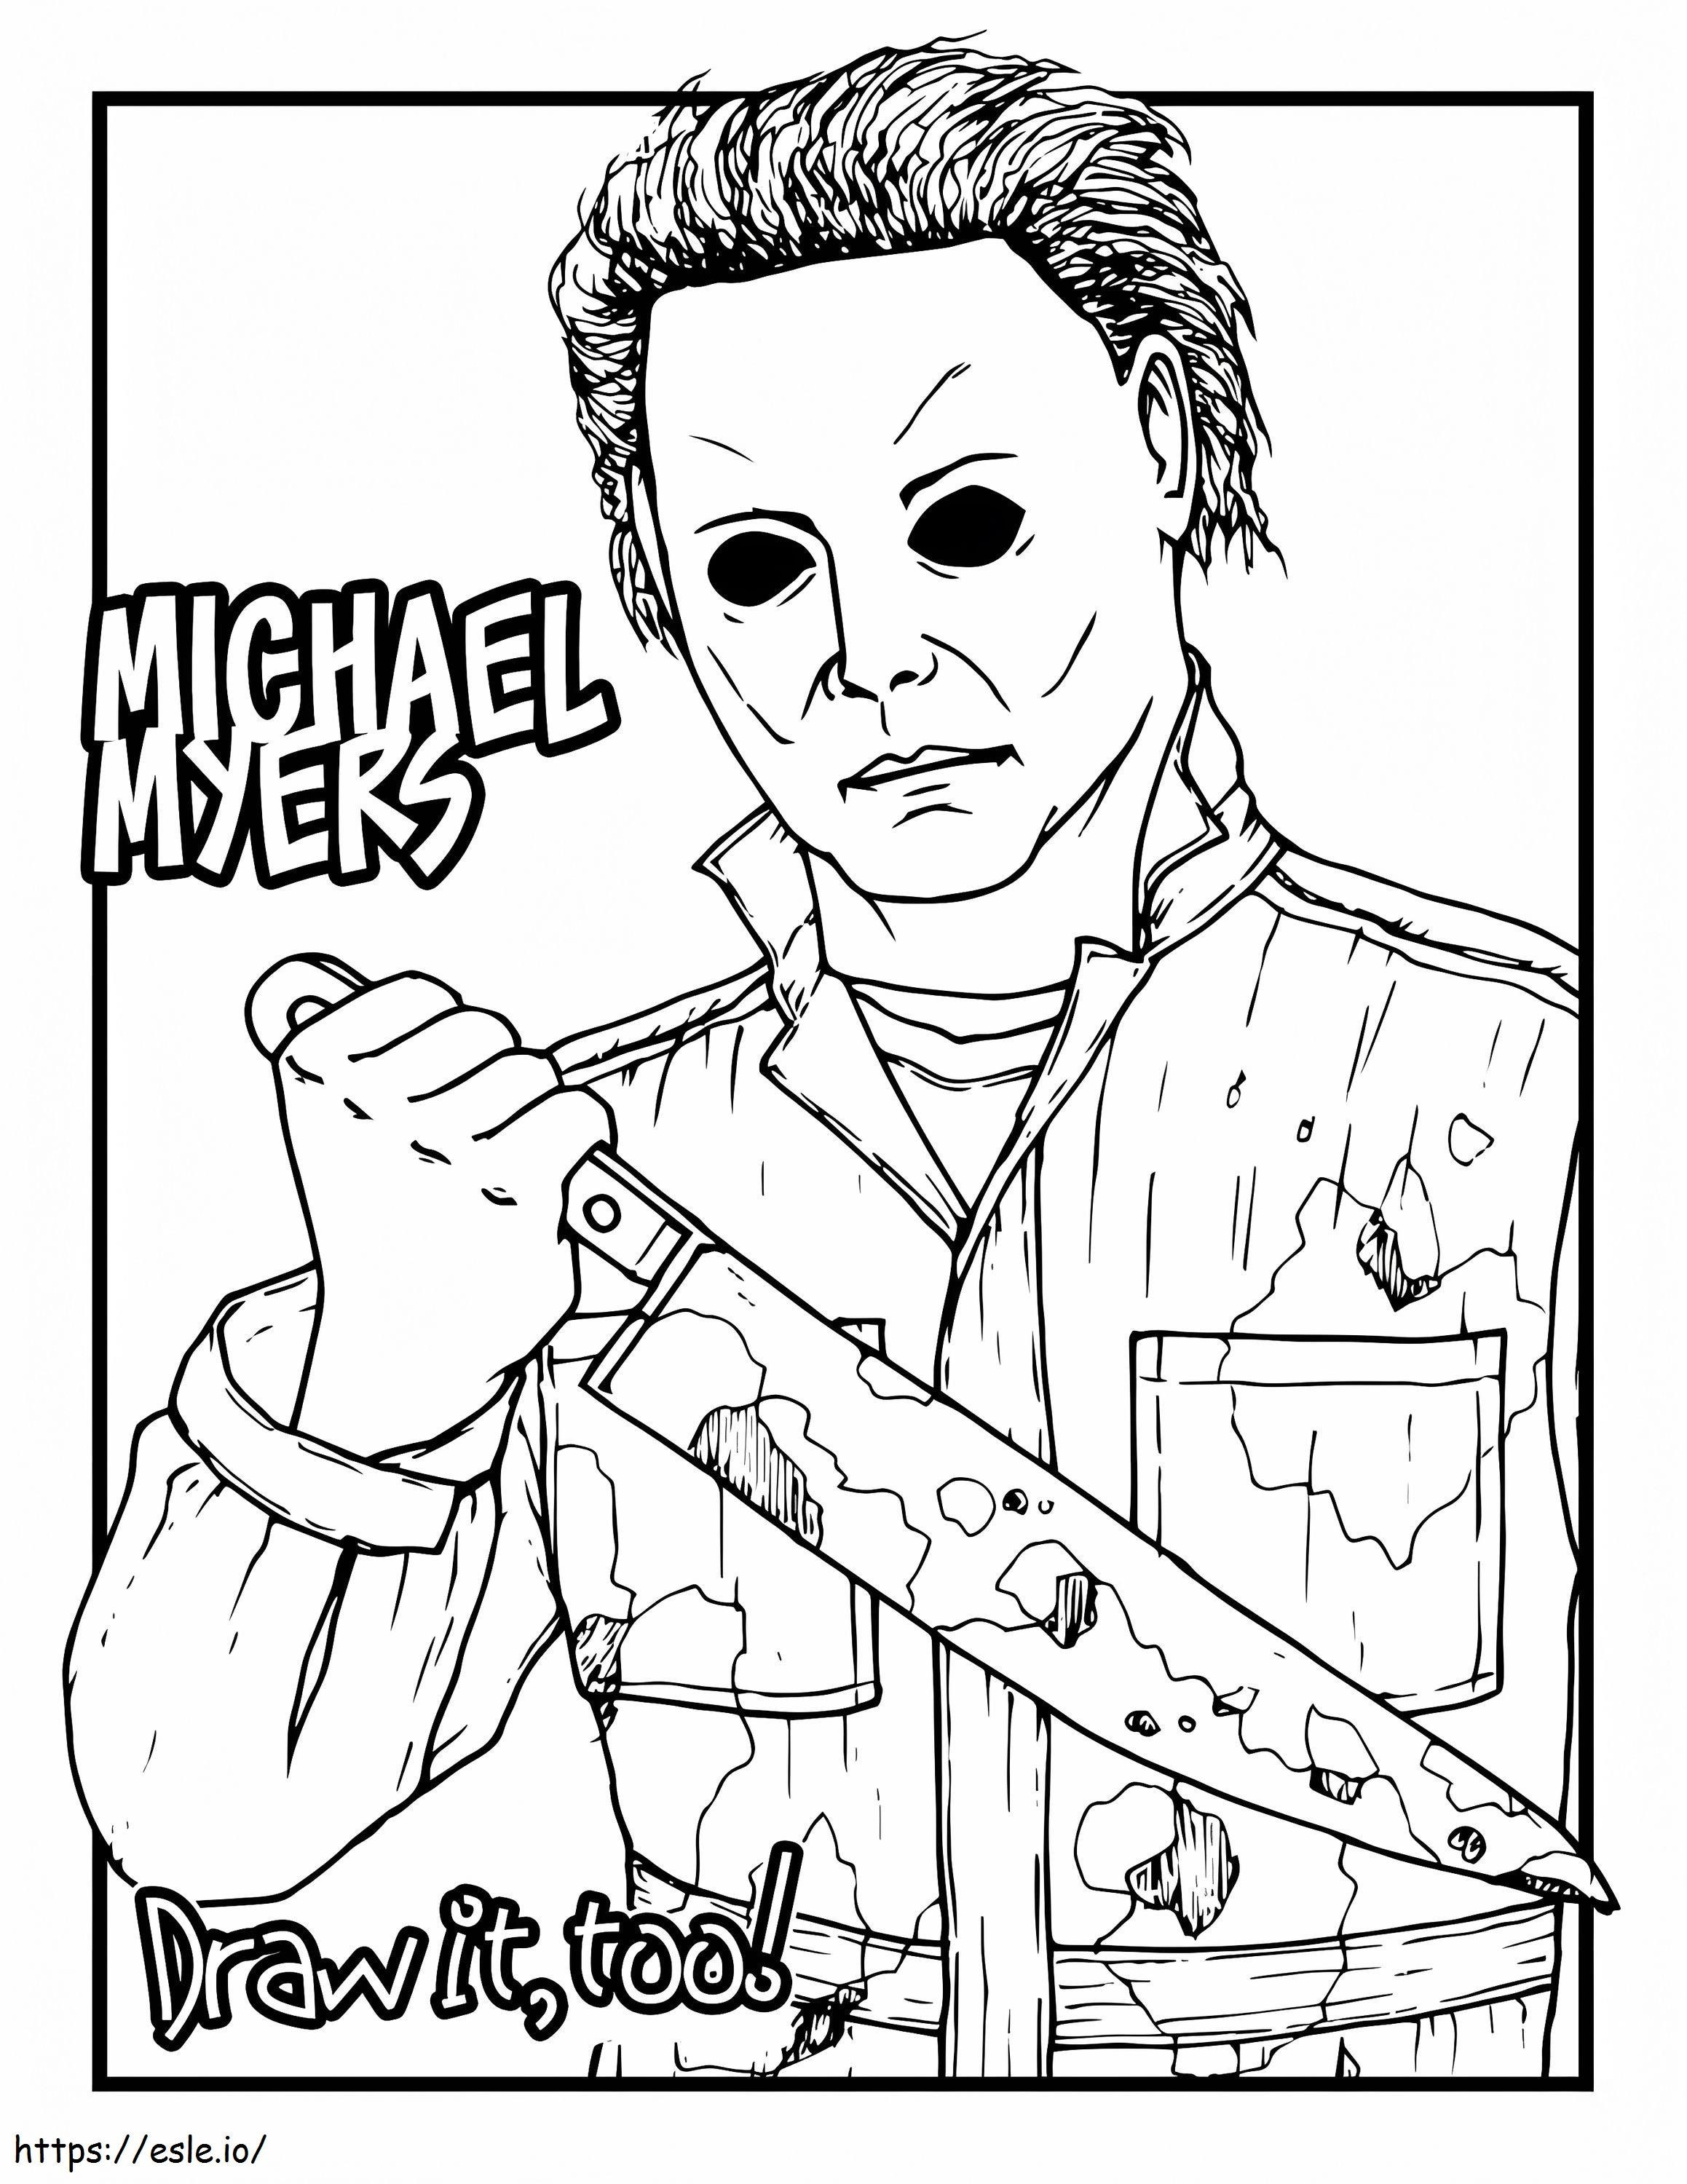 Halloween Michael Myers coloring page